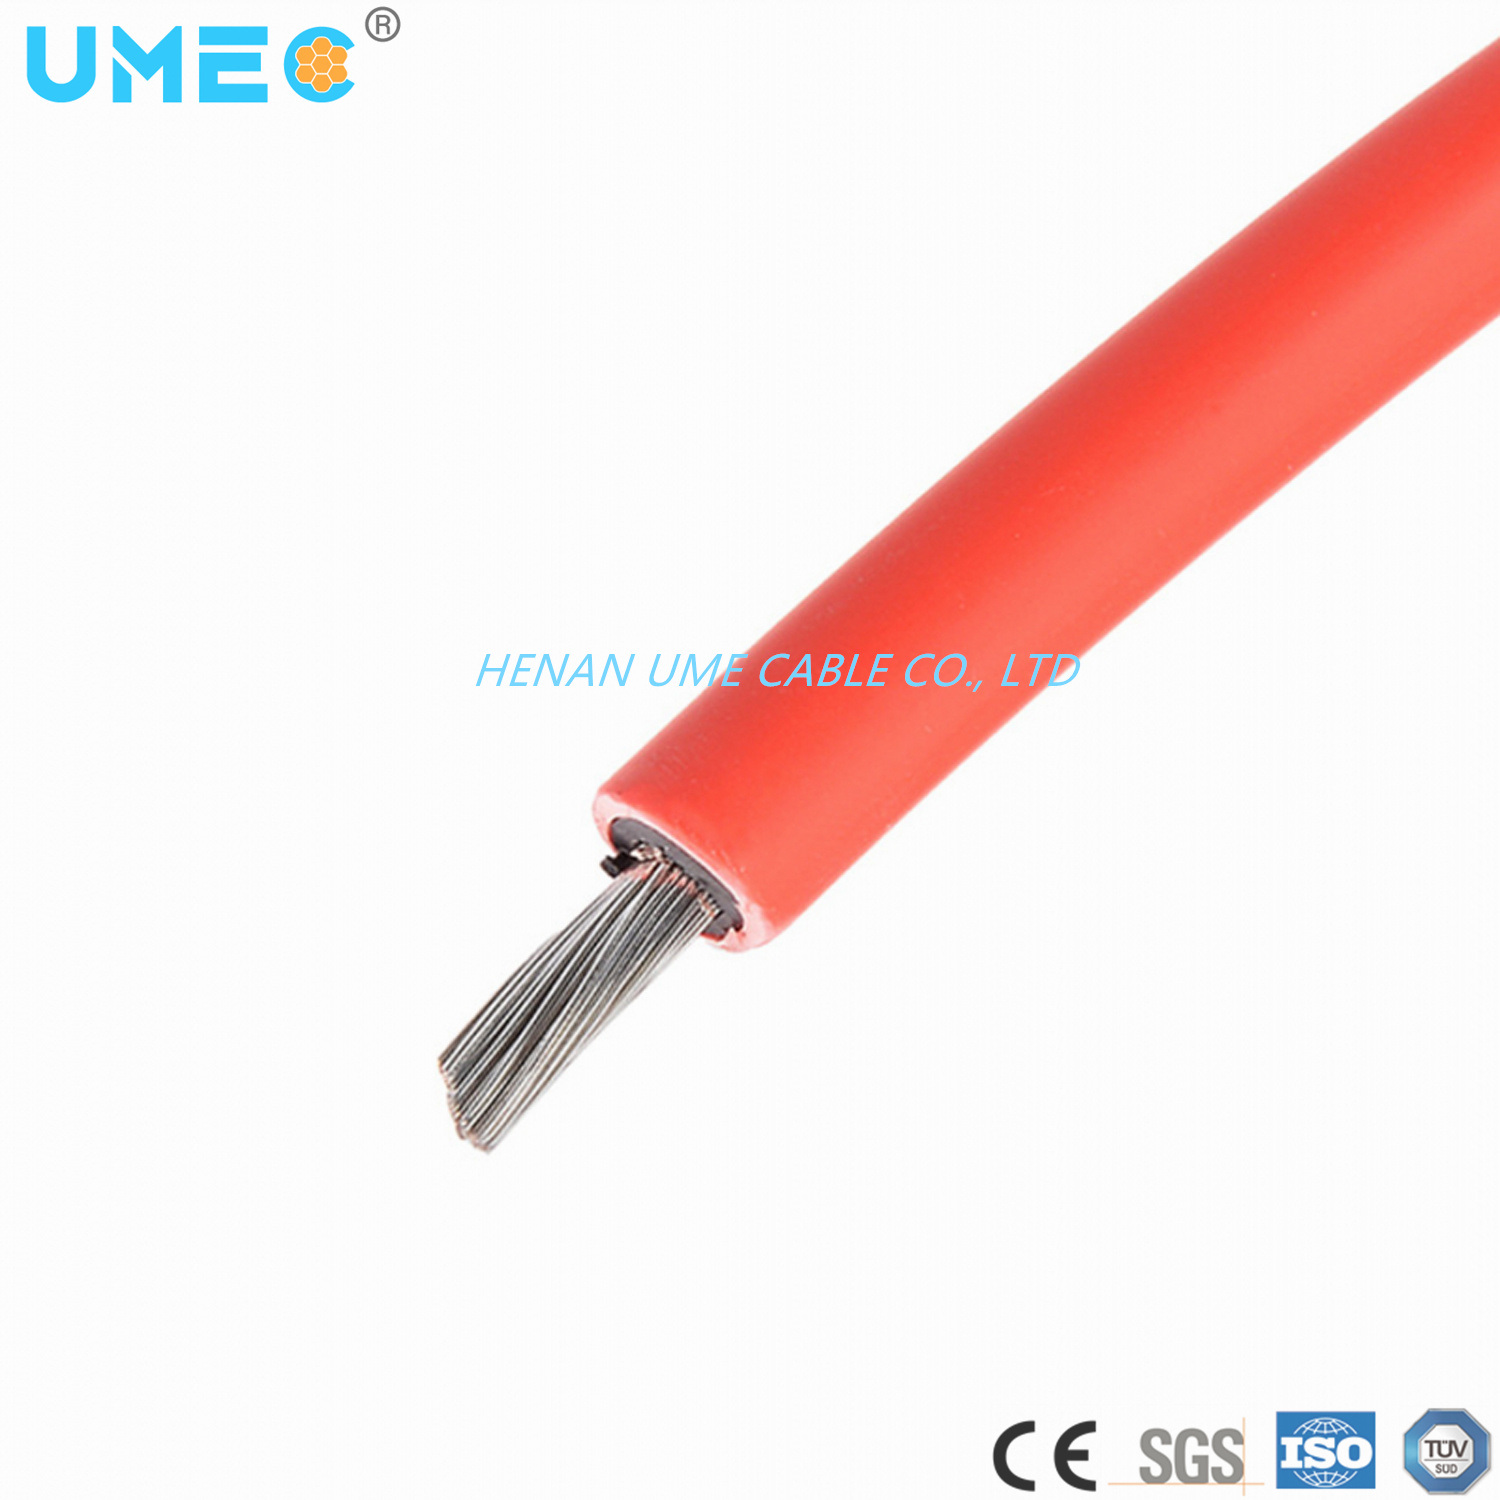 Solar Cable PE Insulation 2X1.5/2X4mm2 Tin-Coating Power Cable